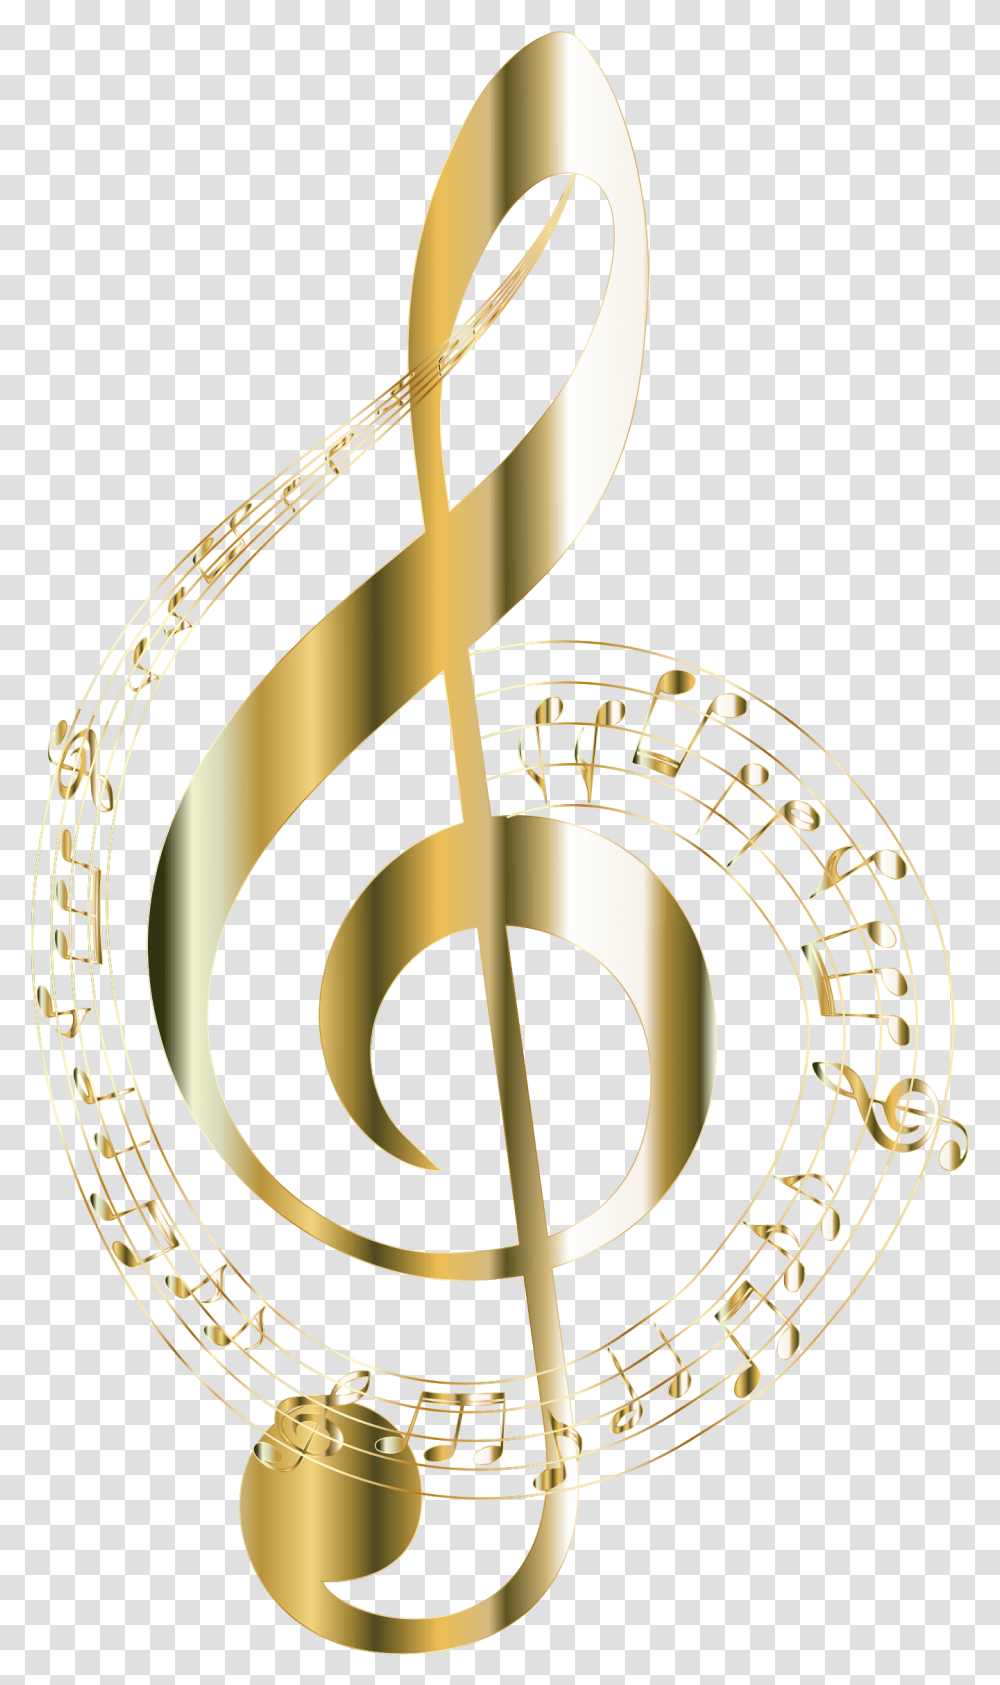 Gold Music Notes 4 Image Background, Musical Instrument, Outdoors, Nature, Leisure Activities Transparent Png